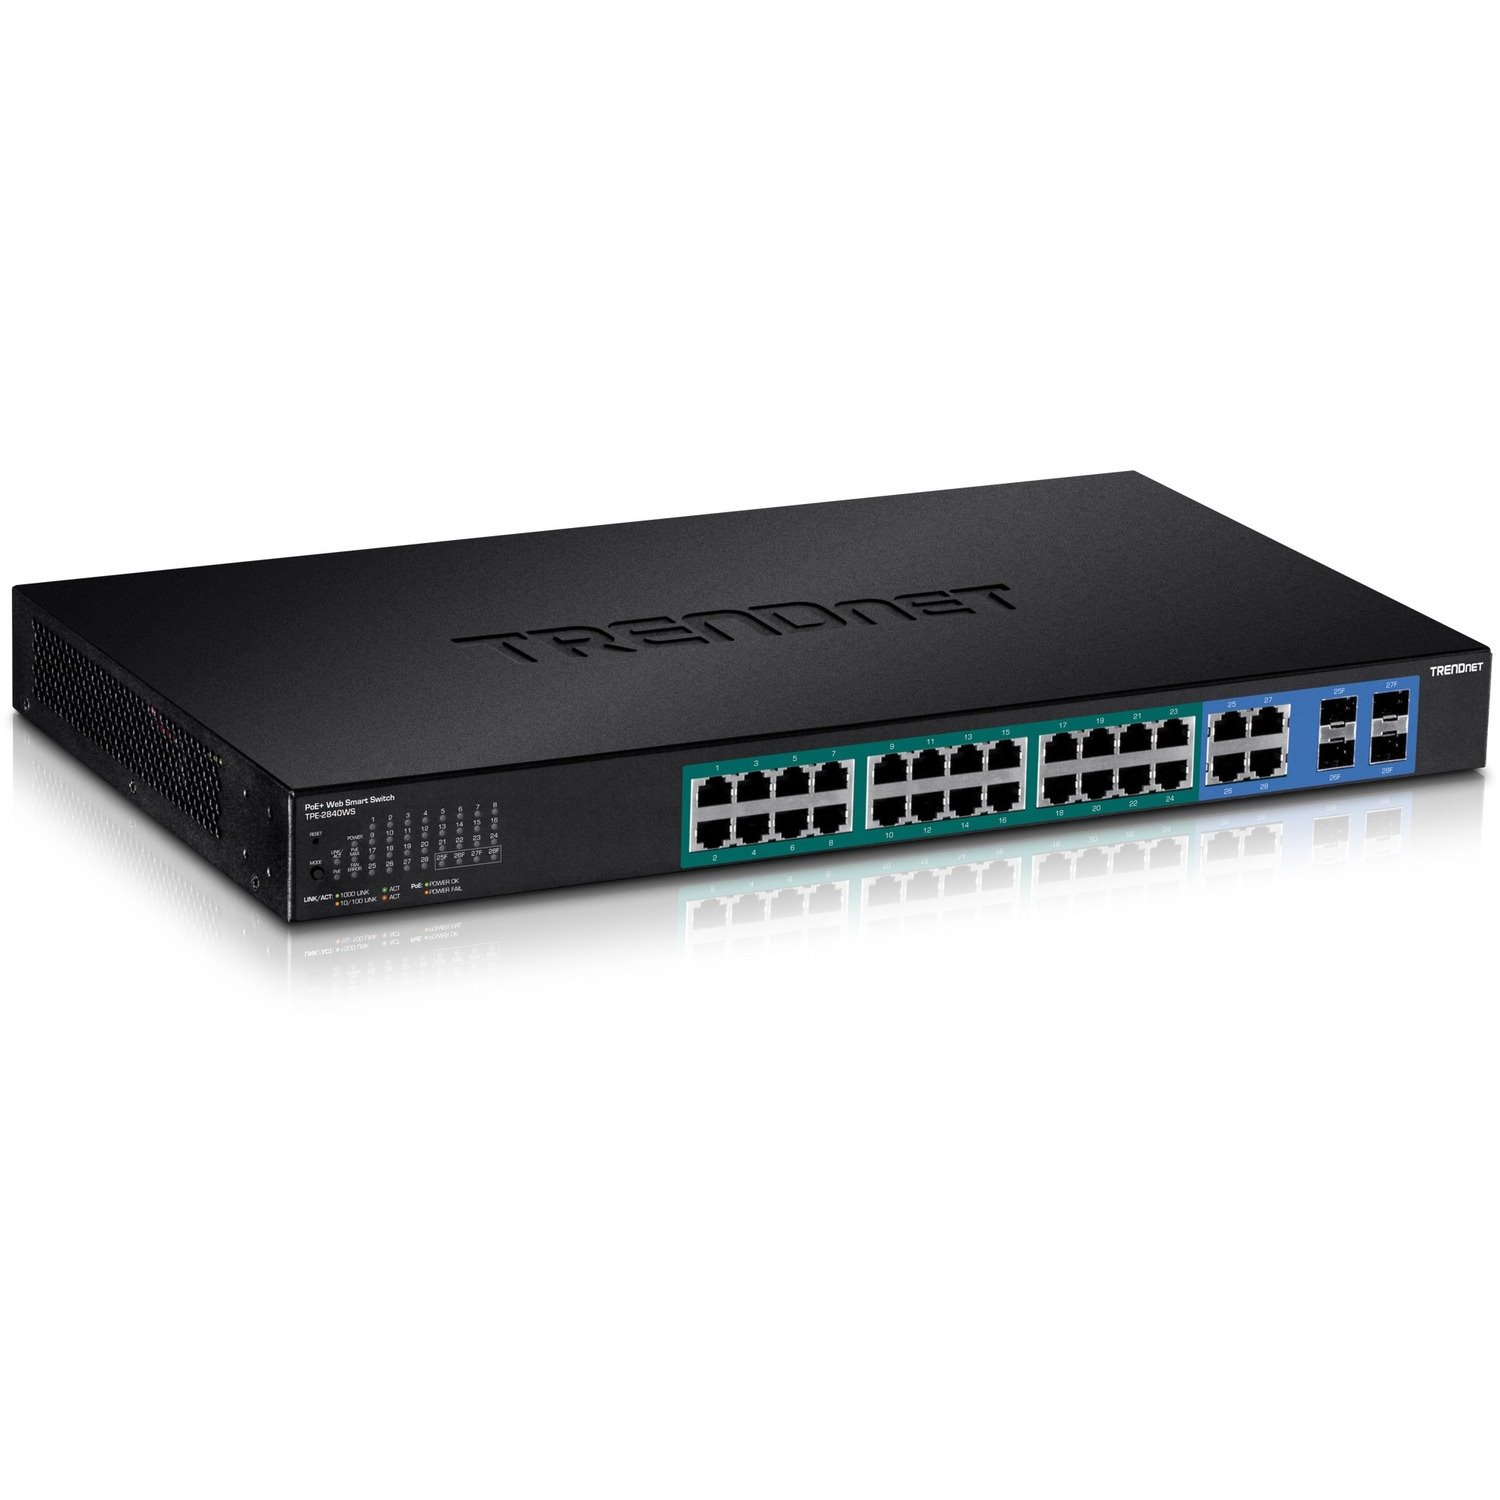 TRENDnet 28-Port Gigabit Web Smart PoE+ Switch, 24 x Gigabit Ports, 4 x Shared Gigabit Ports (RJ-45 or SFP), 185W PoE Budget, 56Gbps Switching Capacity, Lifetime Protection, Black, TPE-2840WS